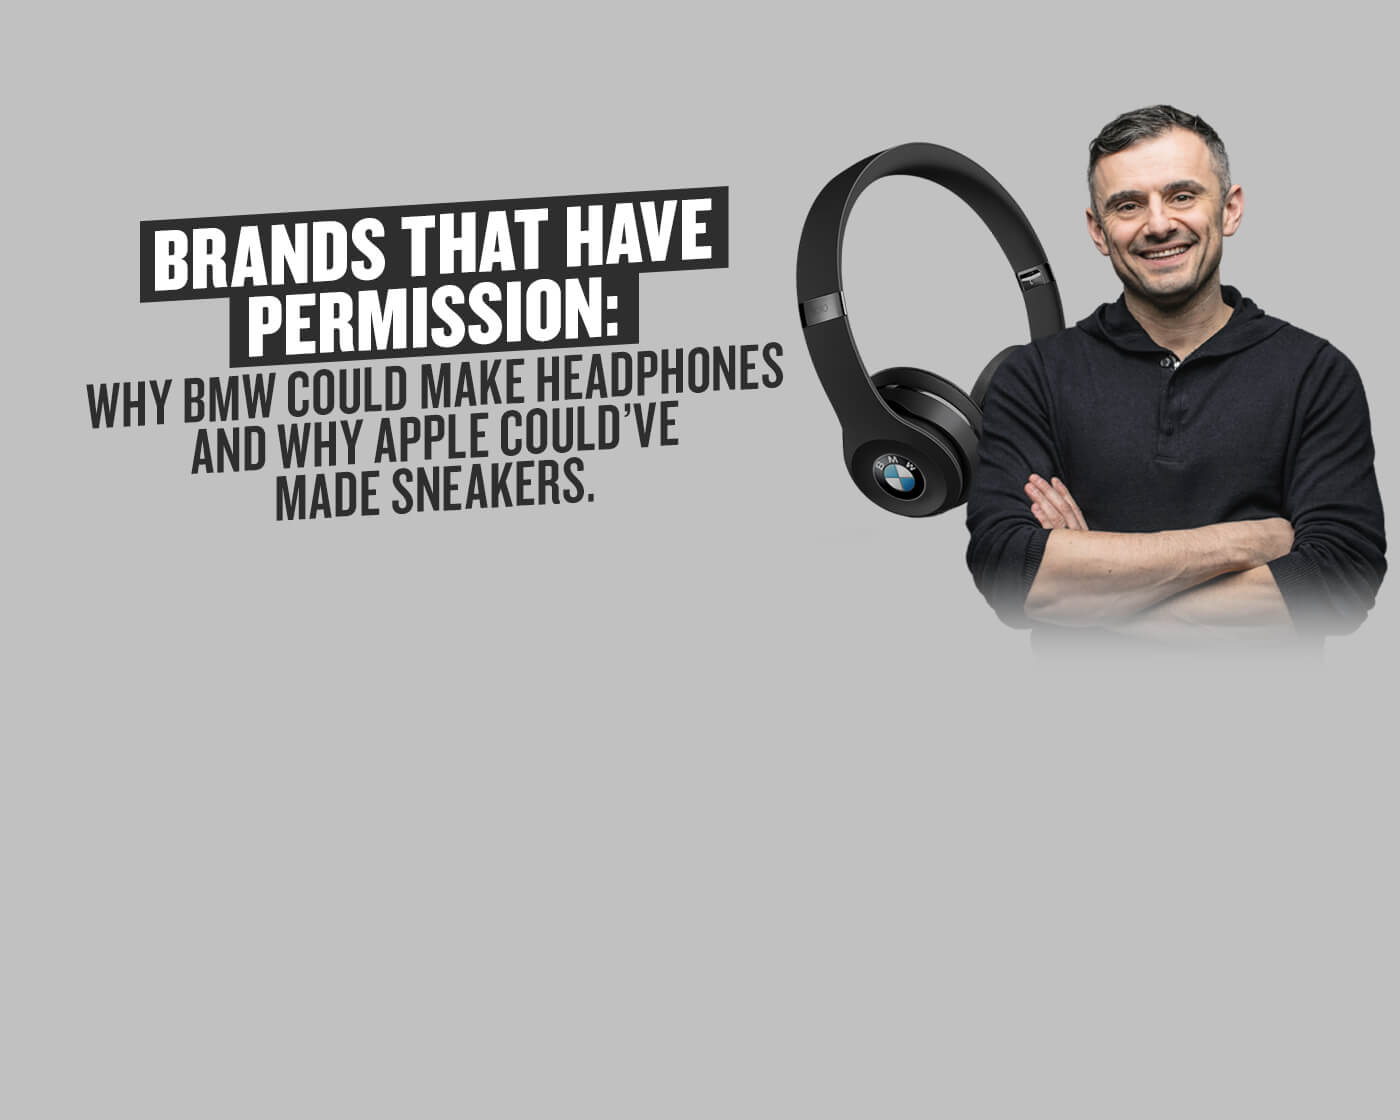 Brands that Have Permission: What if BMW Made Headphones and Apple Launched a Sneaker?